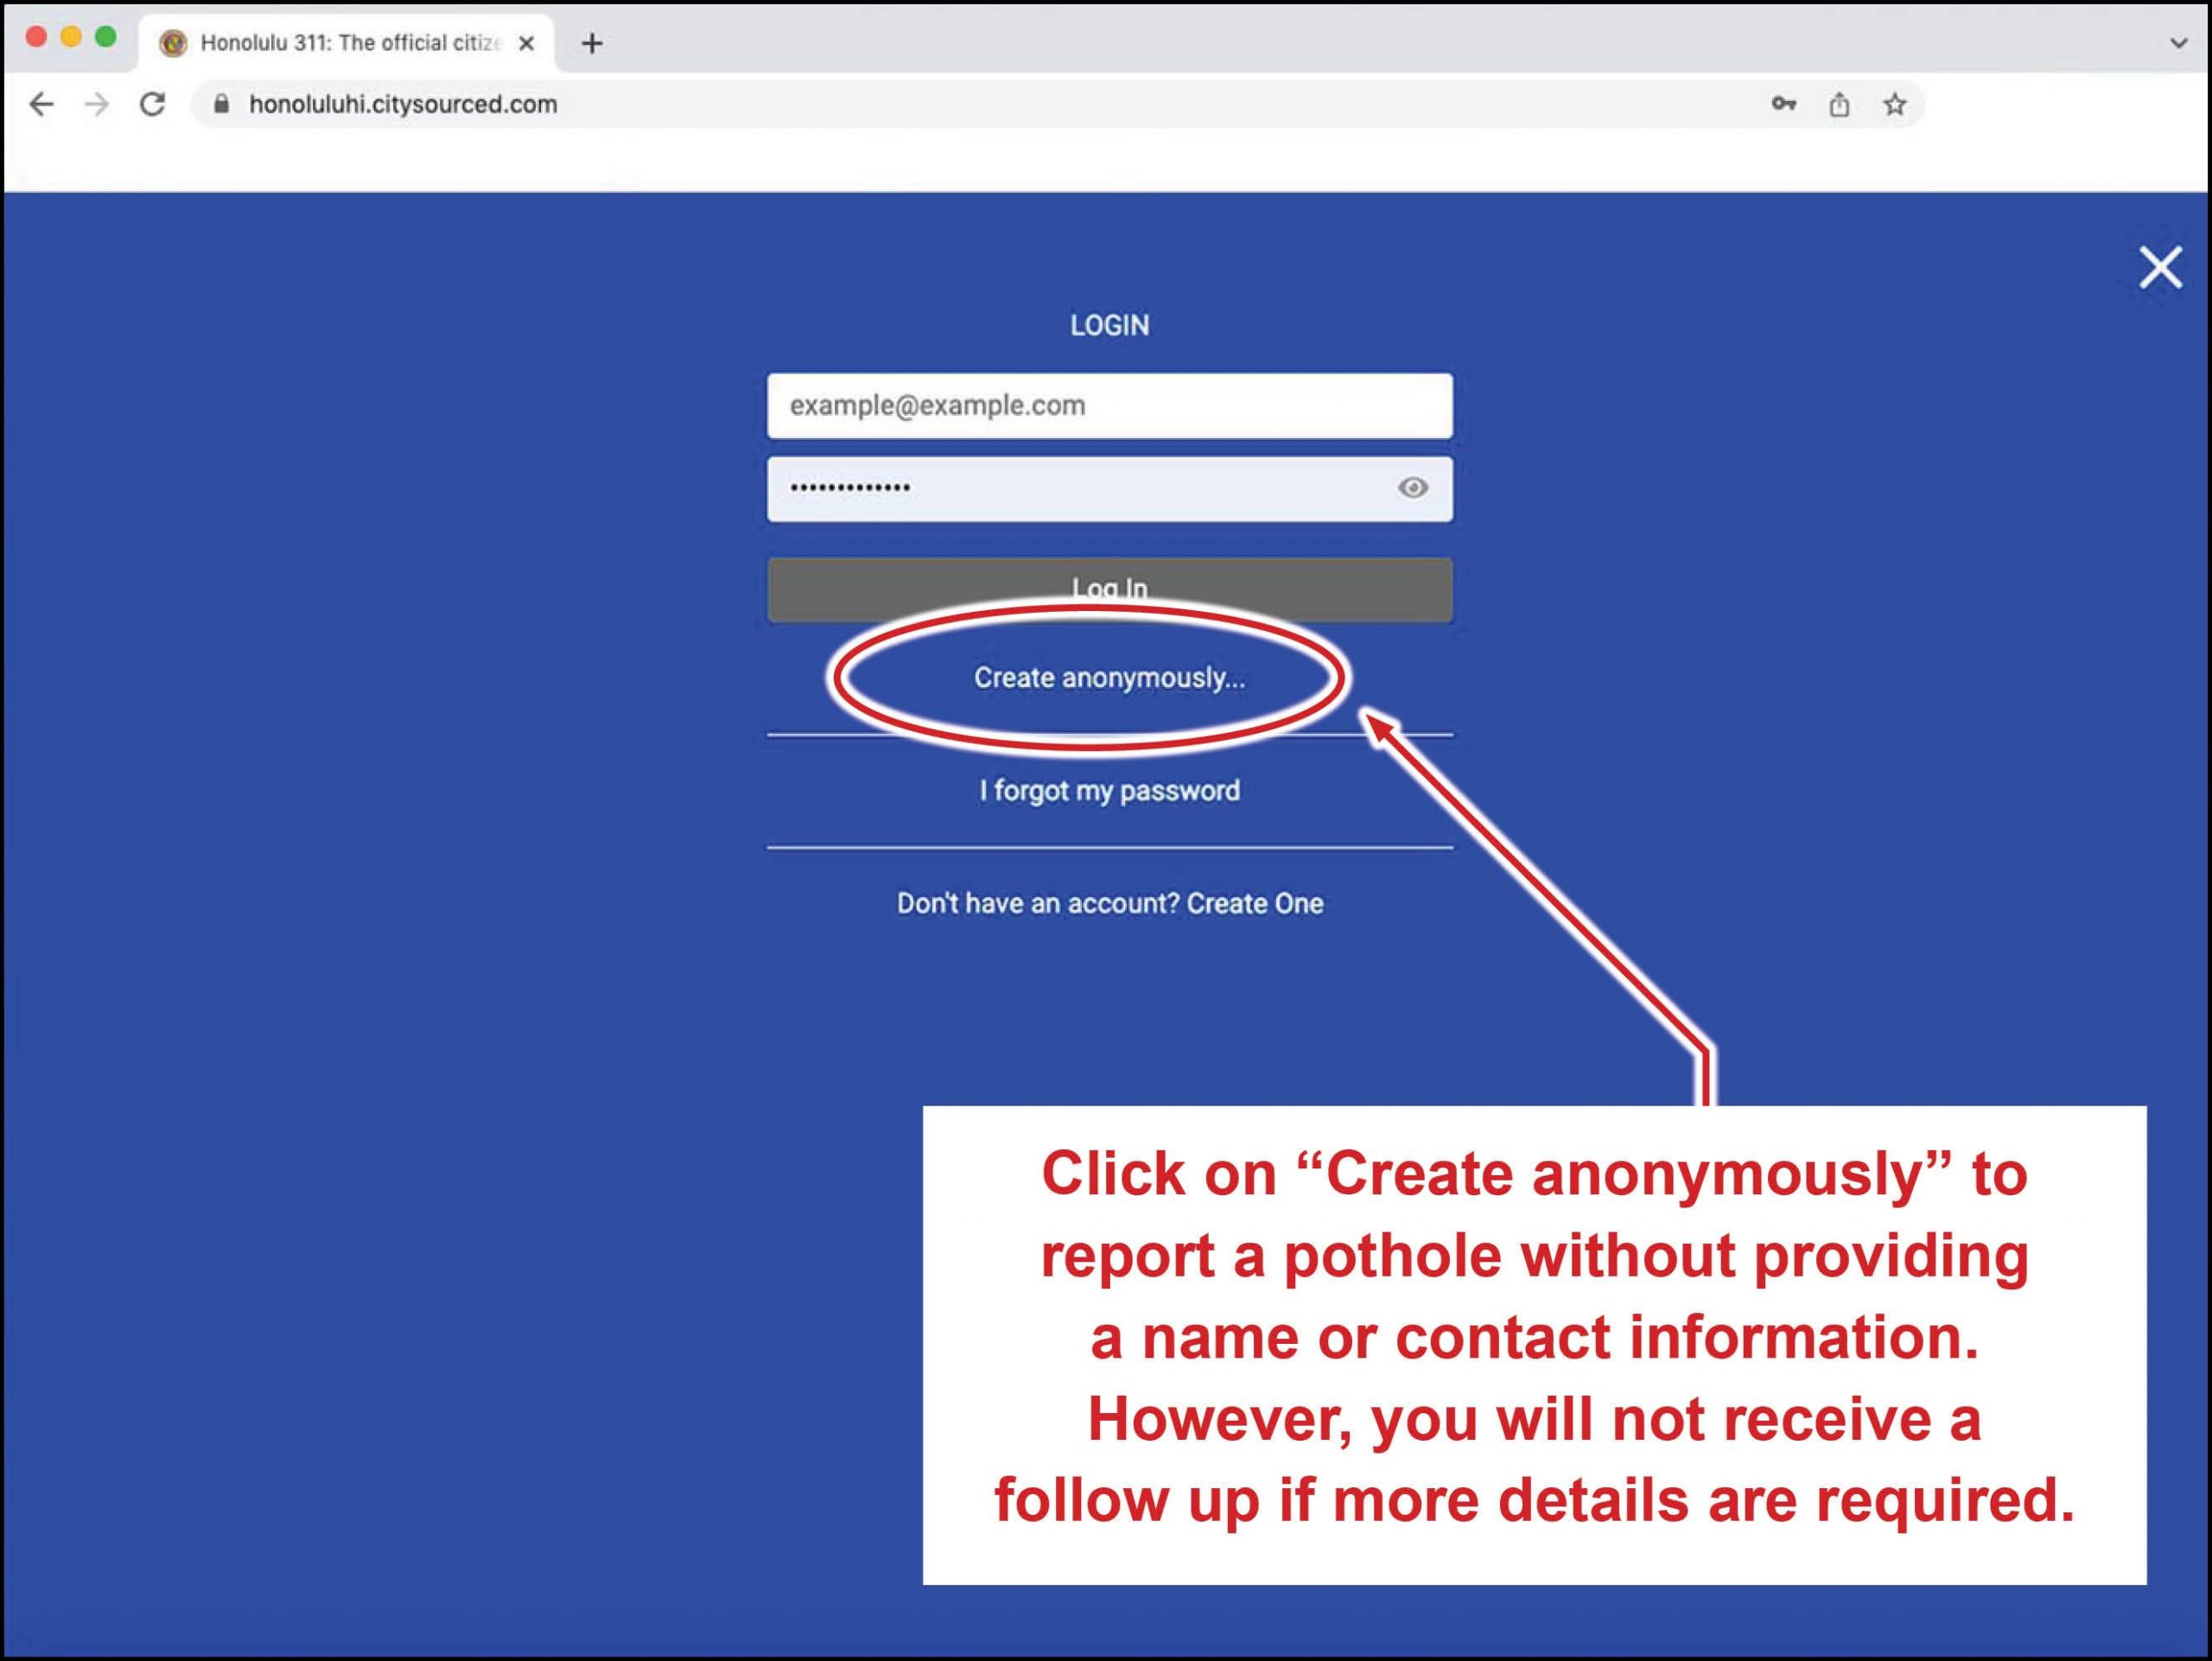 Click on "Create anonymously to report a pothole without providing a name or contact information. However, you will not receive a follow up if more details are requires.